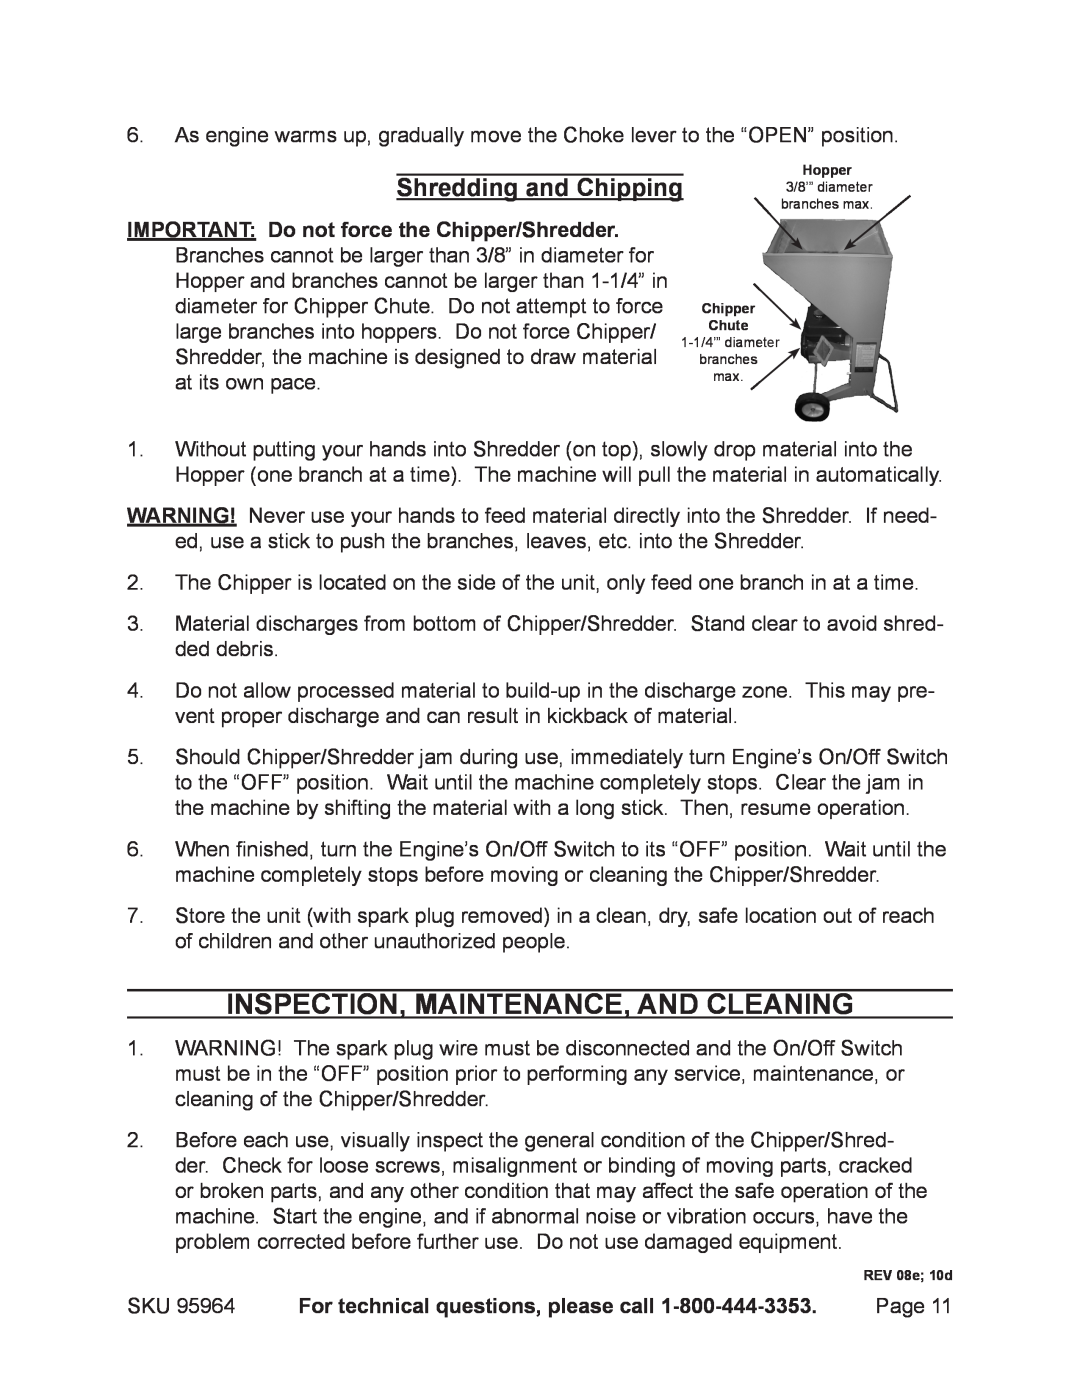 Harbor Freight Tools 95964 operating instructions Inspection, Maintenance, And Cleaning, Shredding and Chipping 